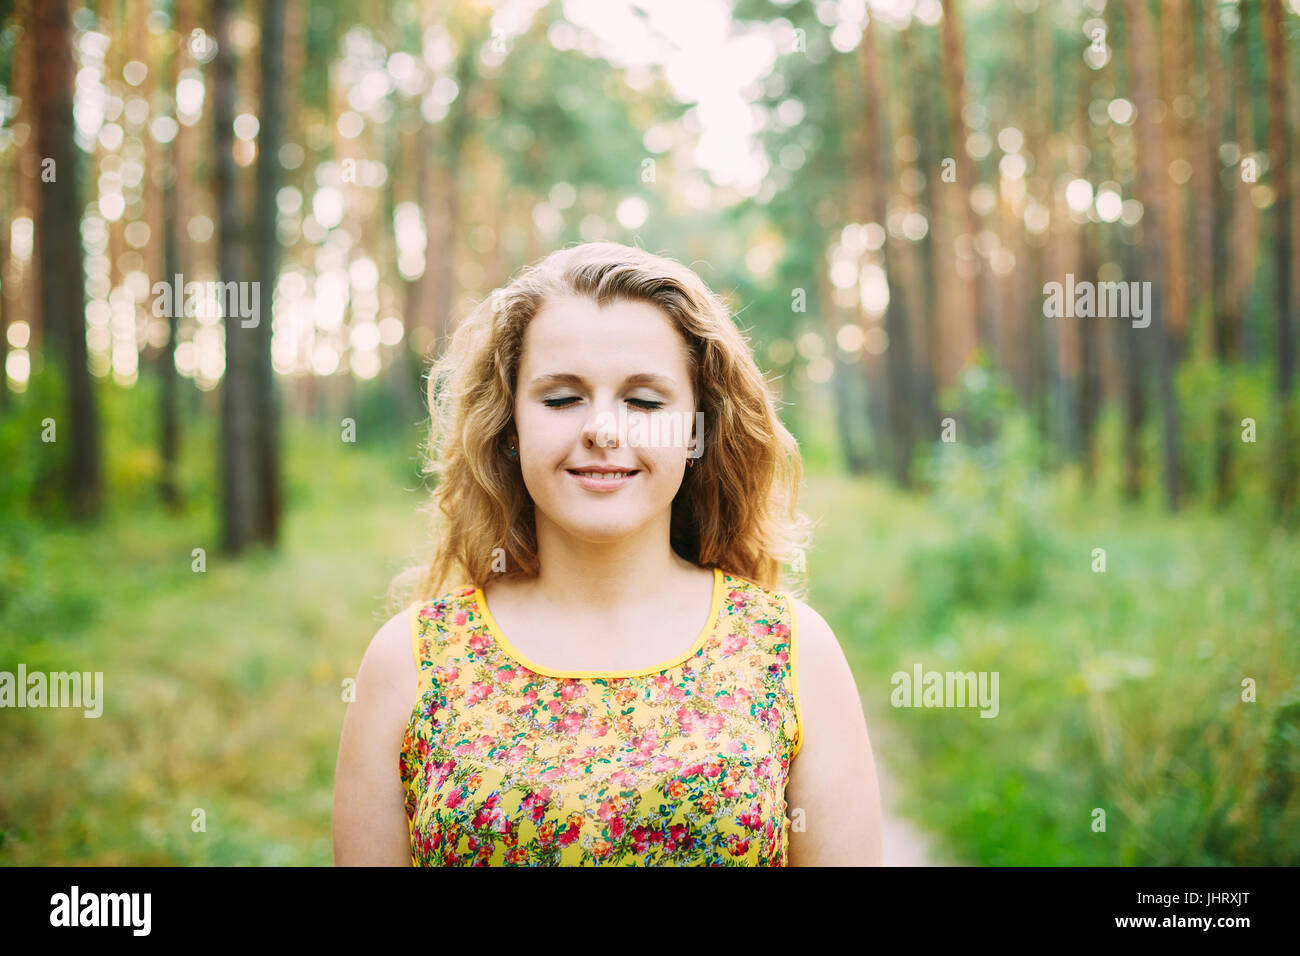 Portrait Of Young Pretty Plus Size Caucasian Happy Girl Woman With Closed Eyes, Wavy Brown Long Hair In Summer Forest Background. Stock Photo